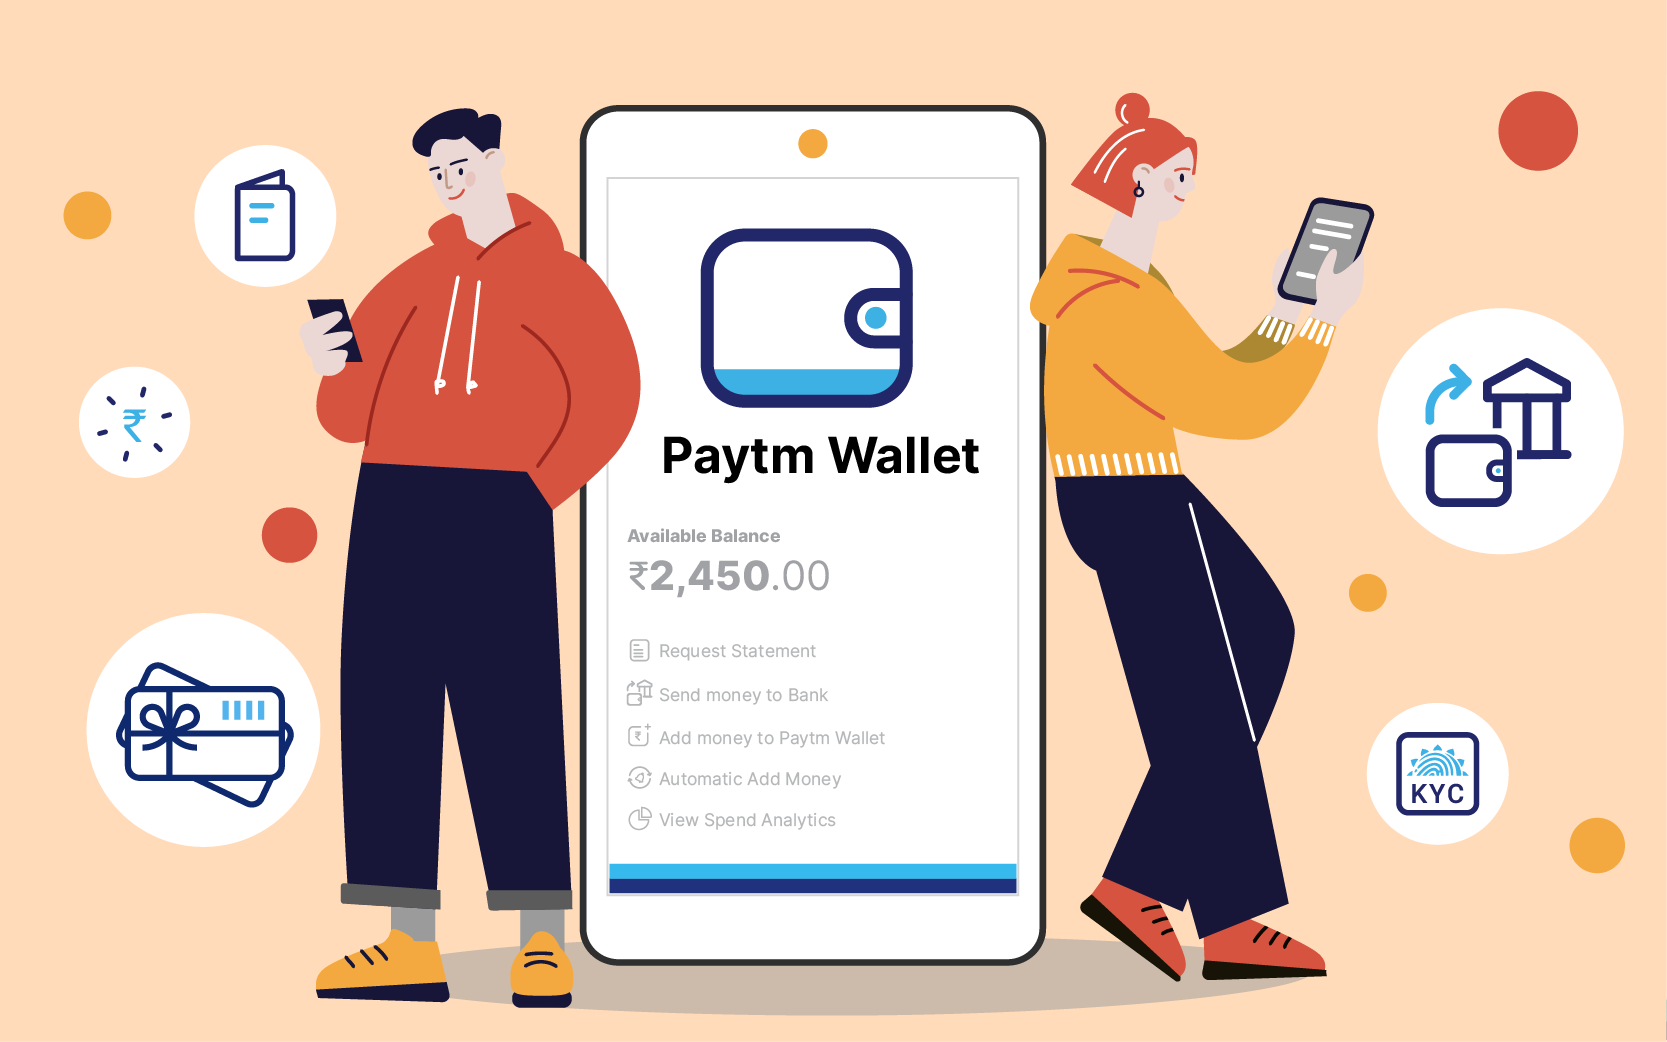 Gain for BharatPe, PhonePe, MobiKwik due to Paytm’s loss